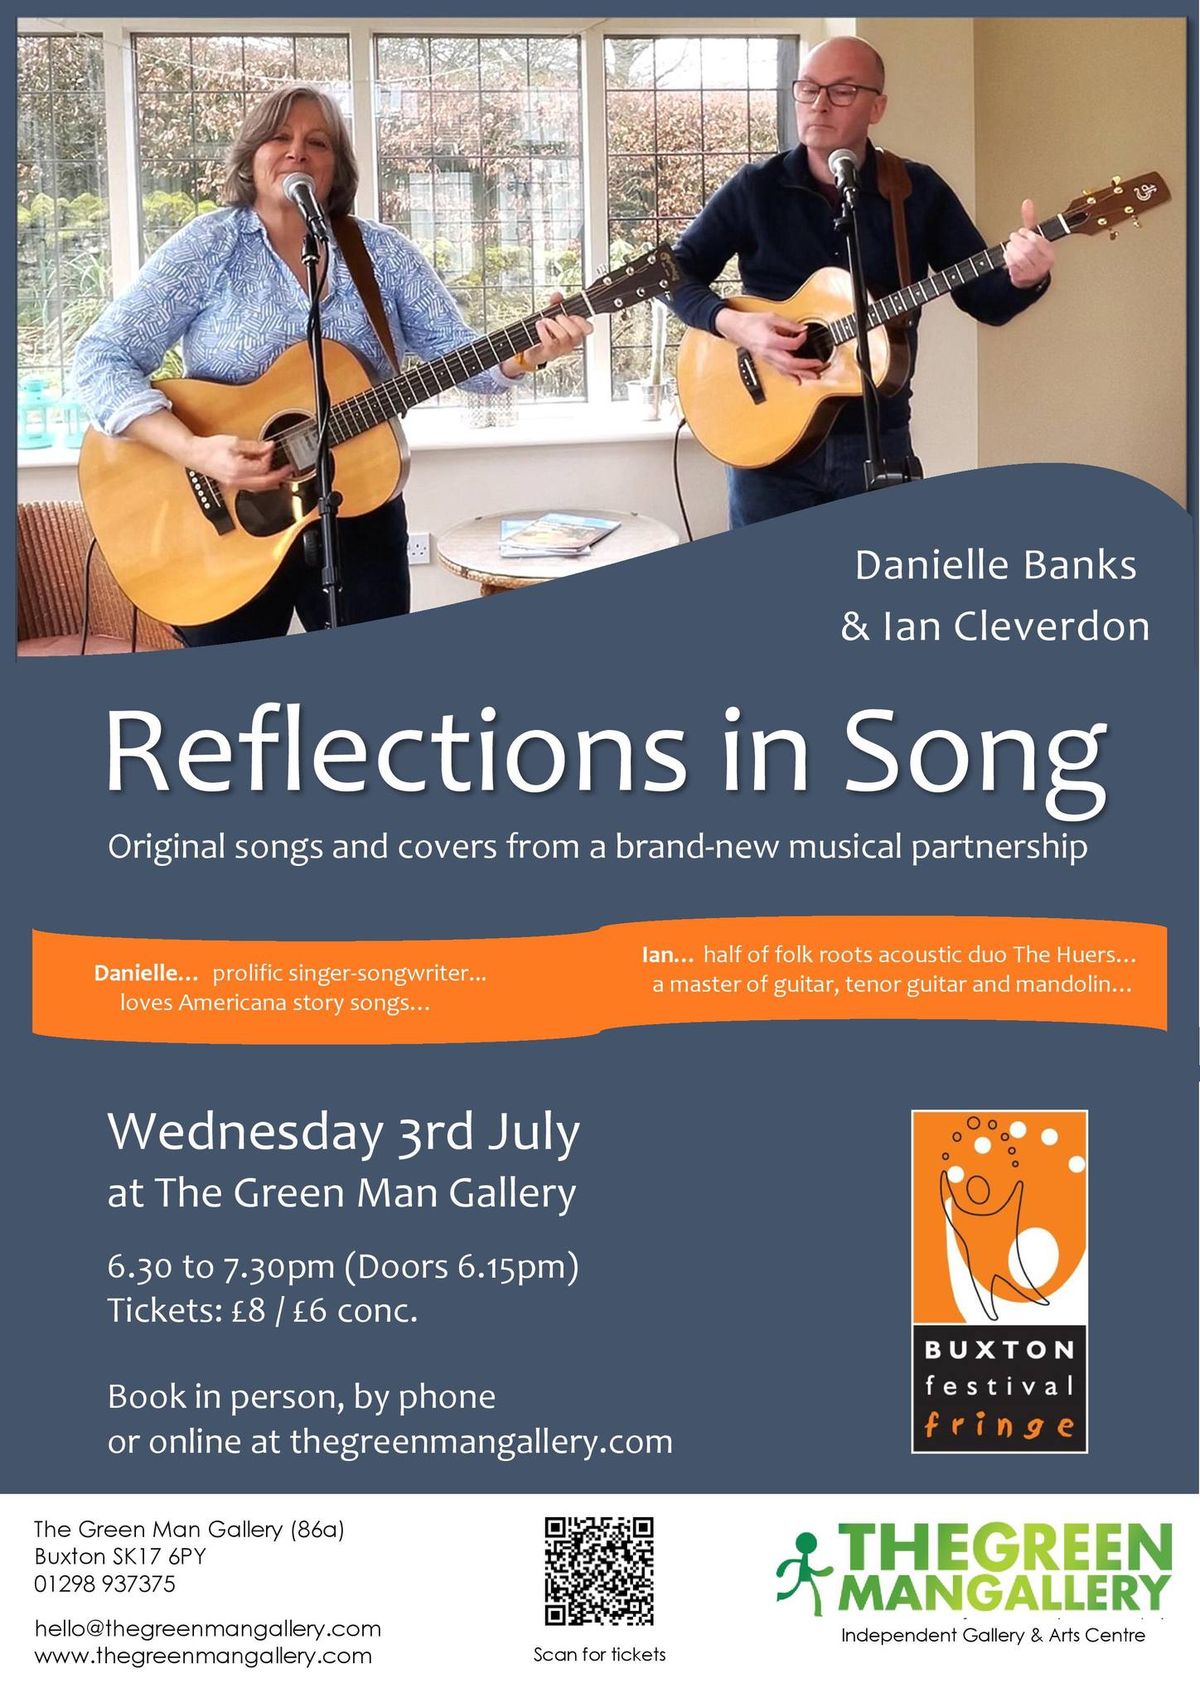 Reflections in Song - Danielle Banks & Ian Cleverdon